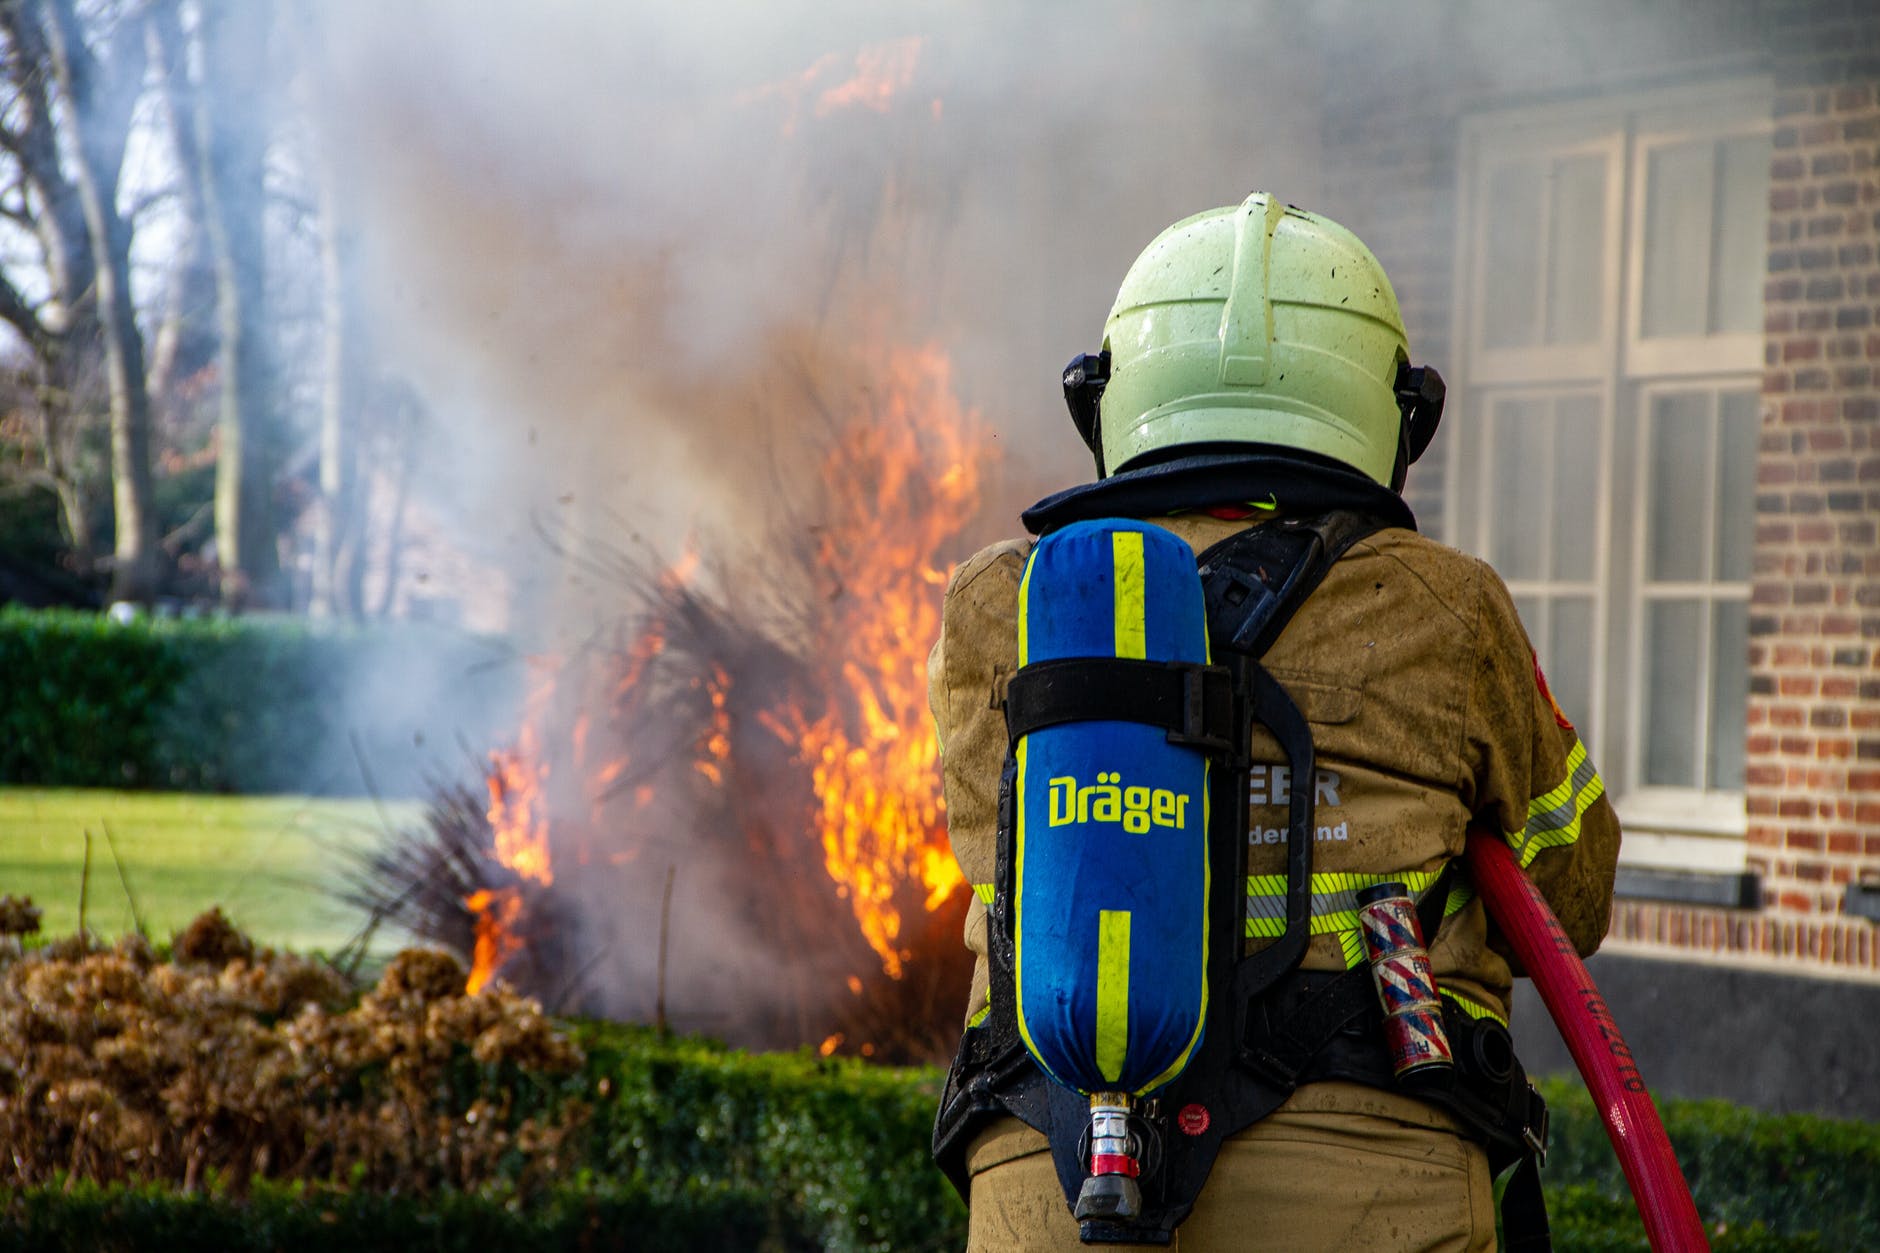 The firefighters managed to extinguish the flames. | Source: Pexels